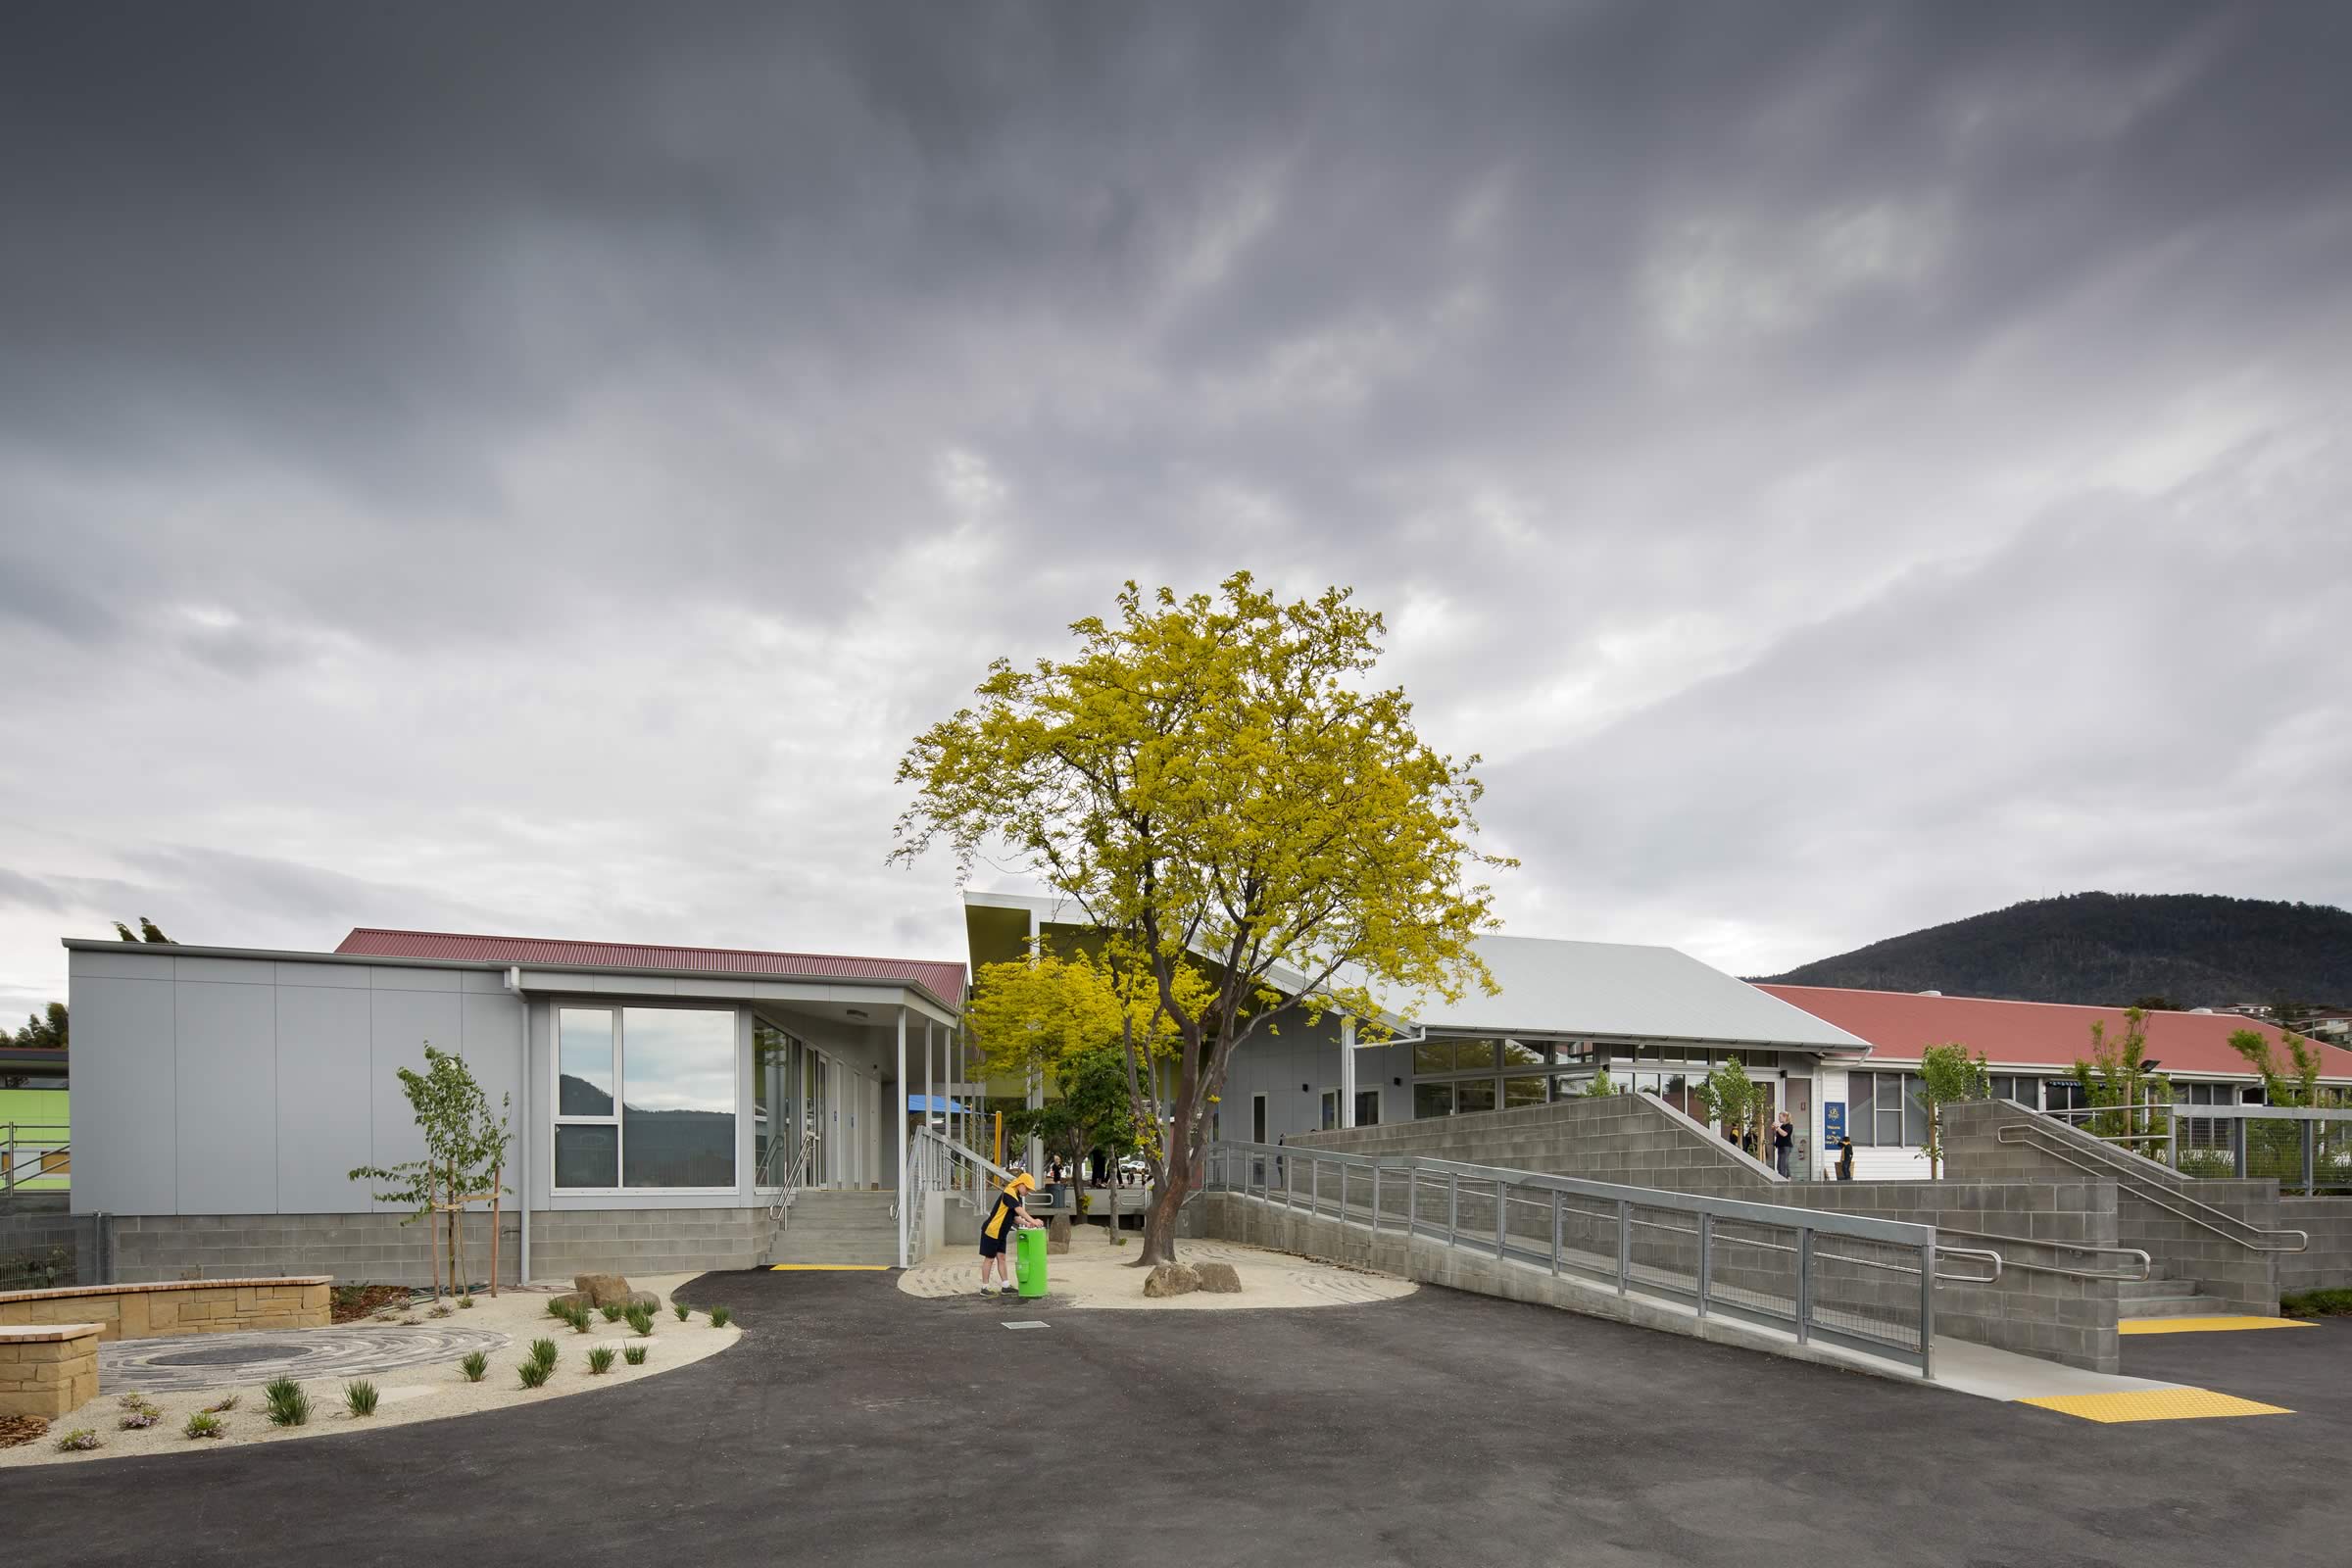 Universal access and a hierarchy of building scale makes the Glenorchy Primary School administration area recognisable and way finding easy. Photo by Thomas Ryan.